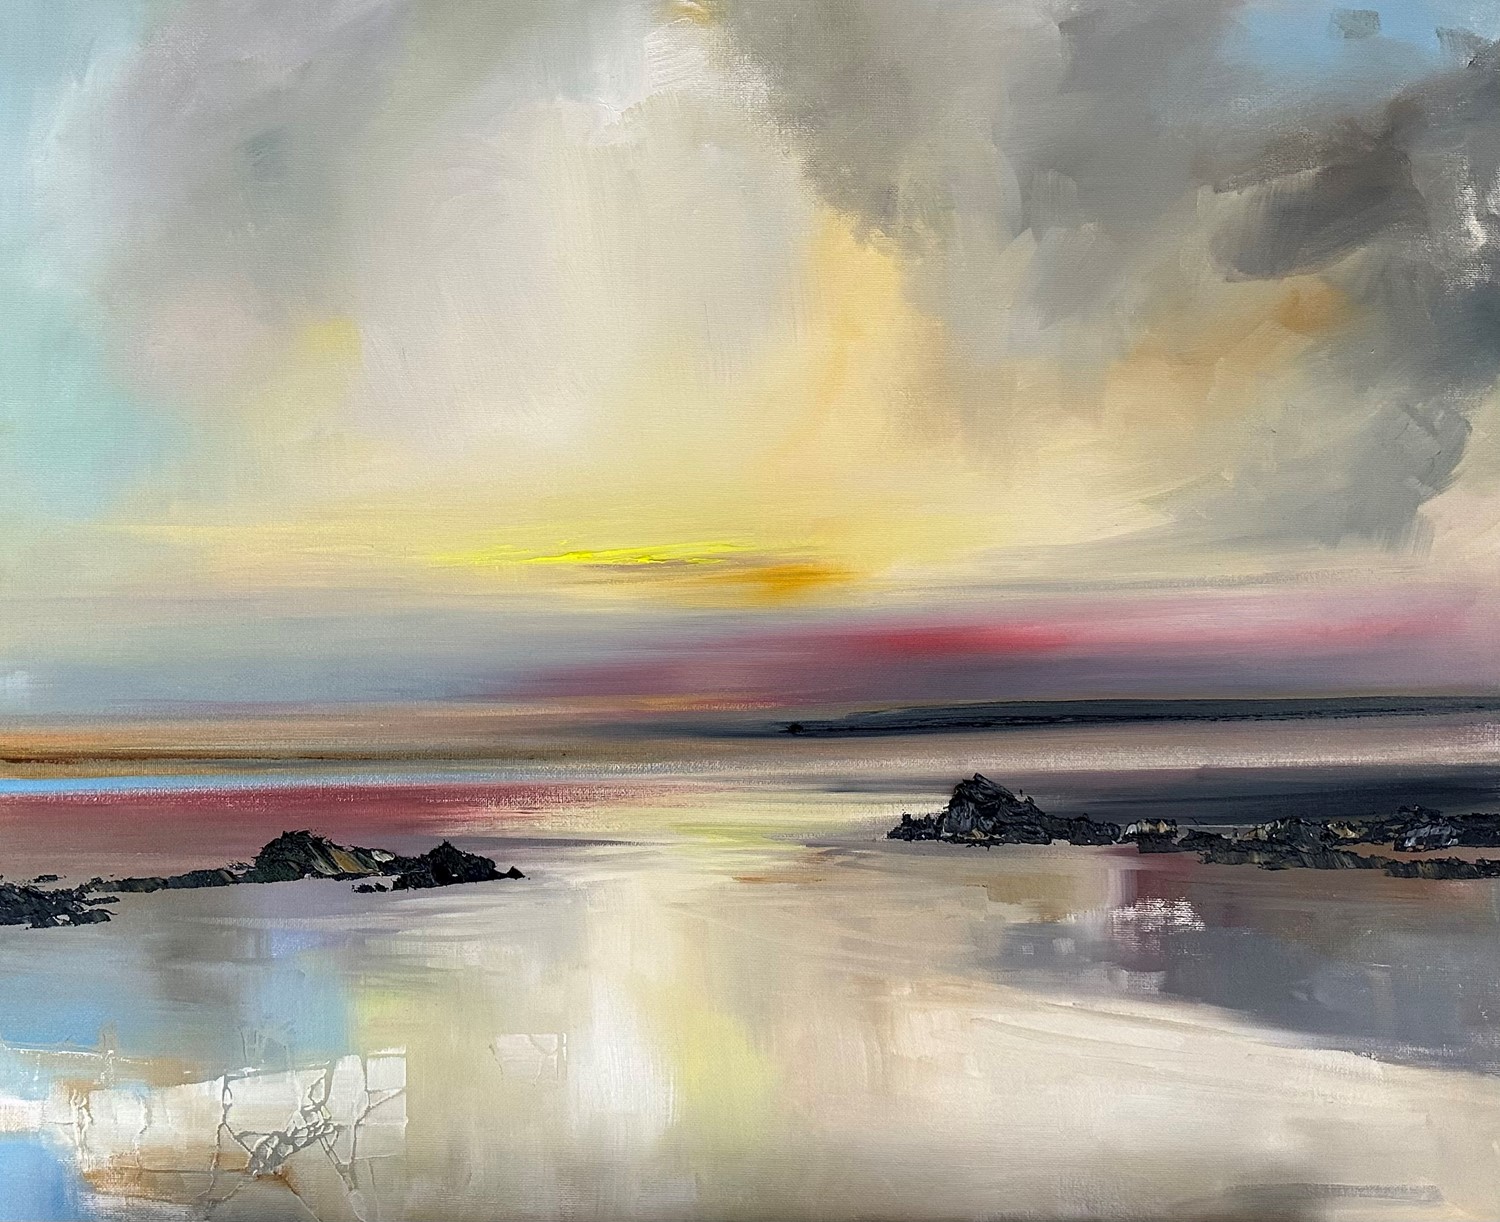 'Pathway through the Skerries' by artist Rosanne Barr